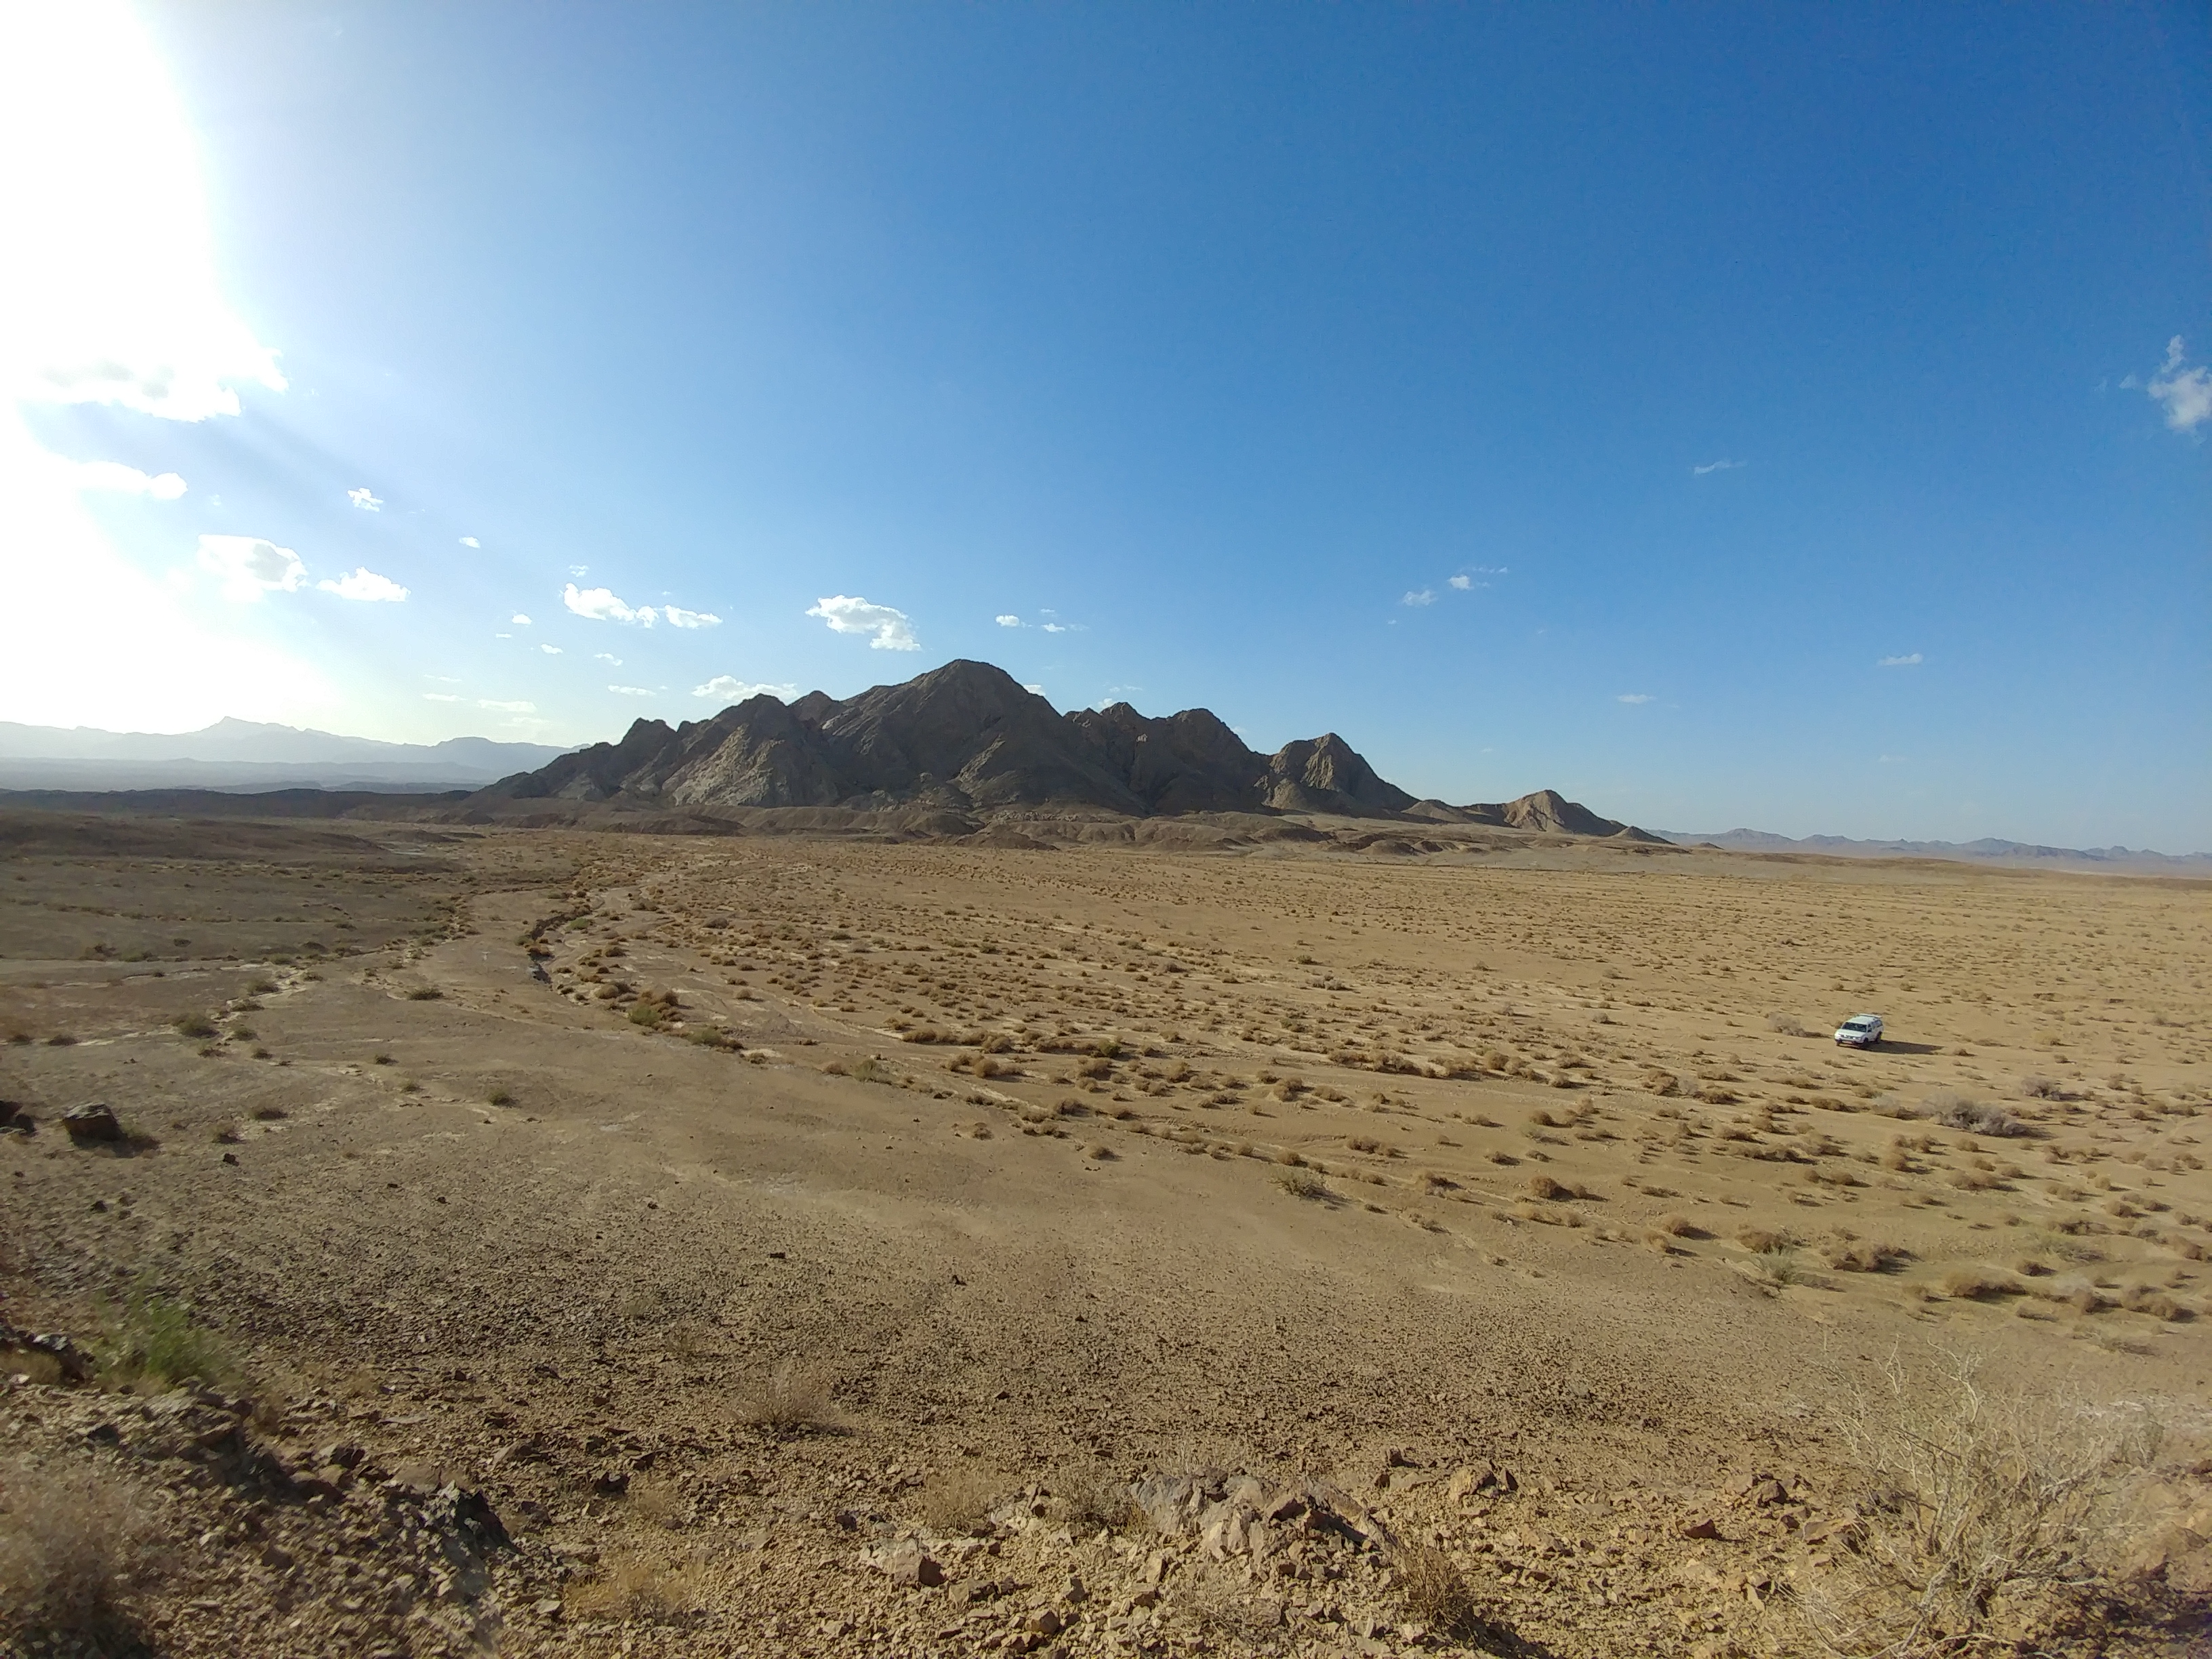 Vast desert with a mountain in the middle